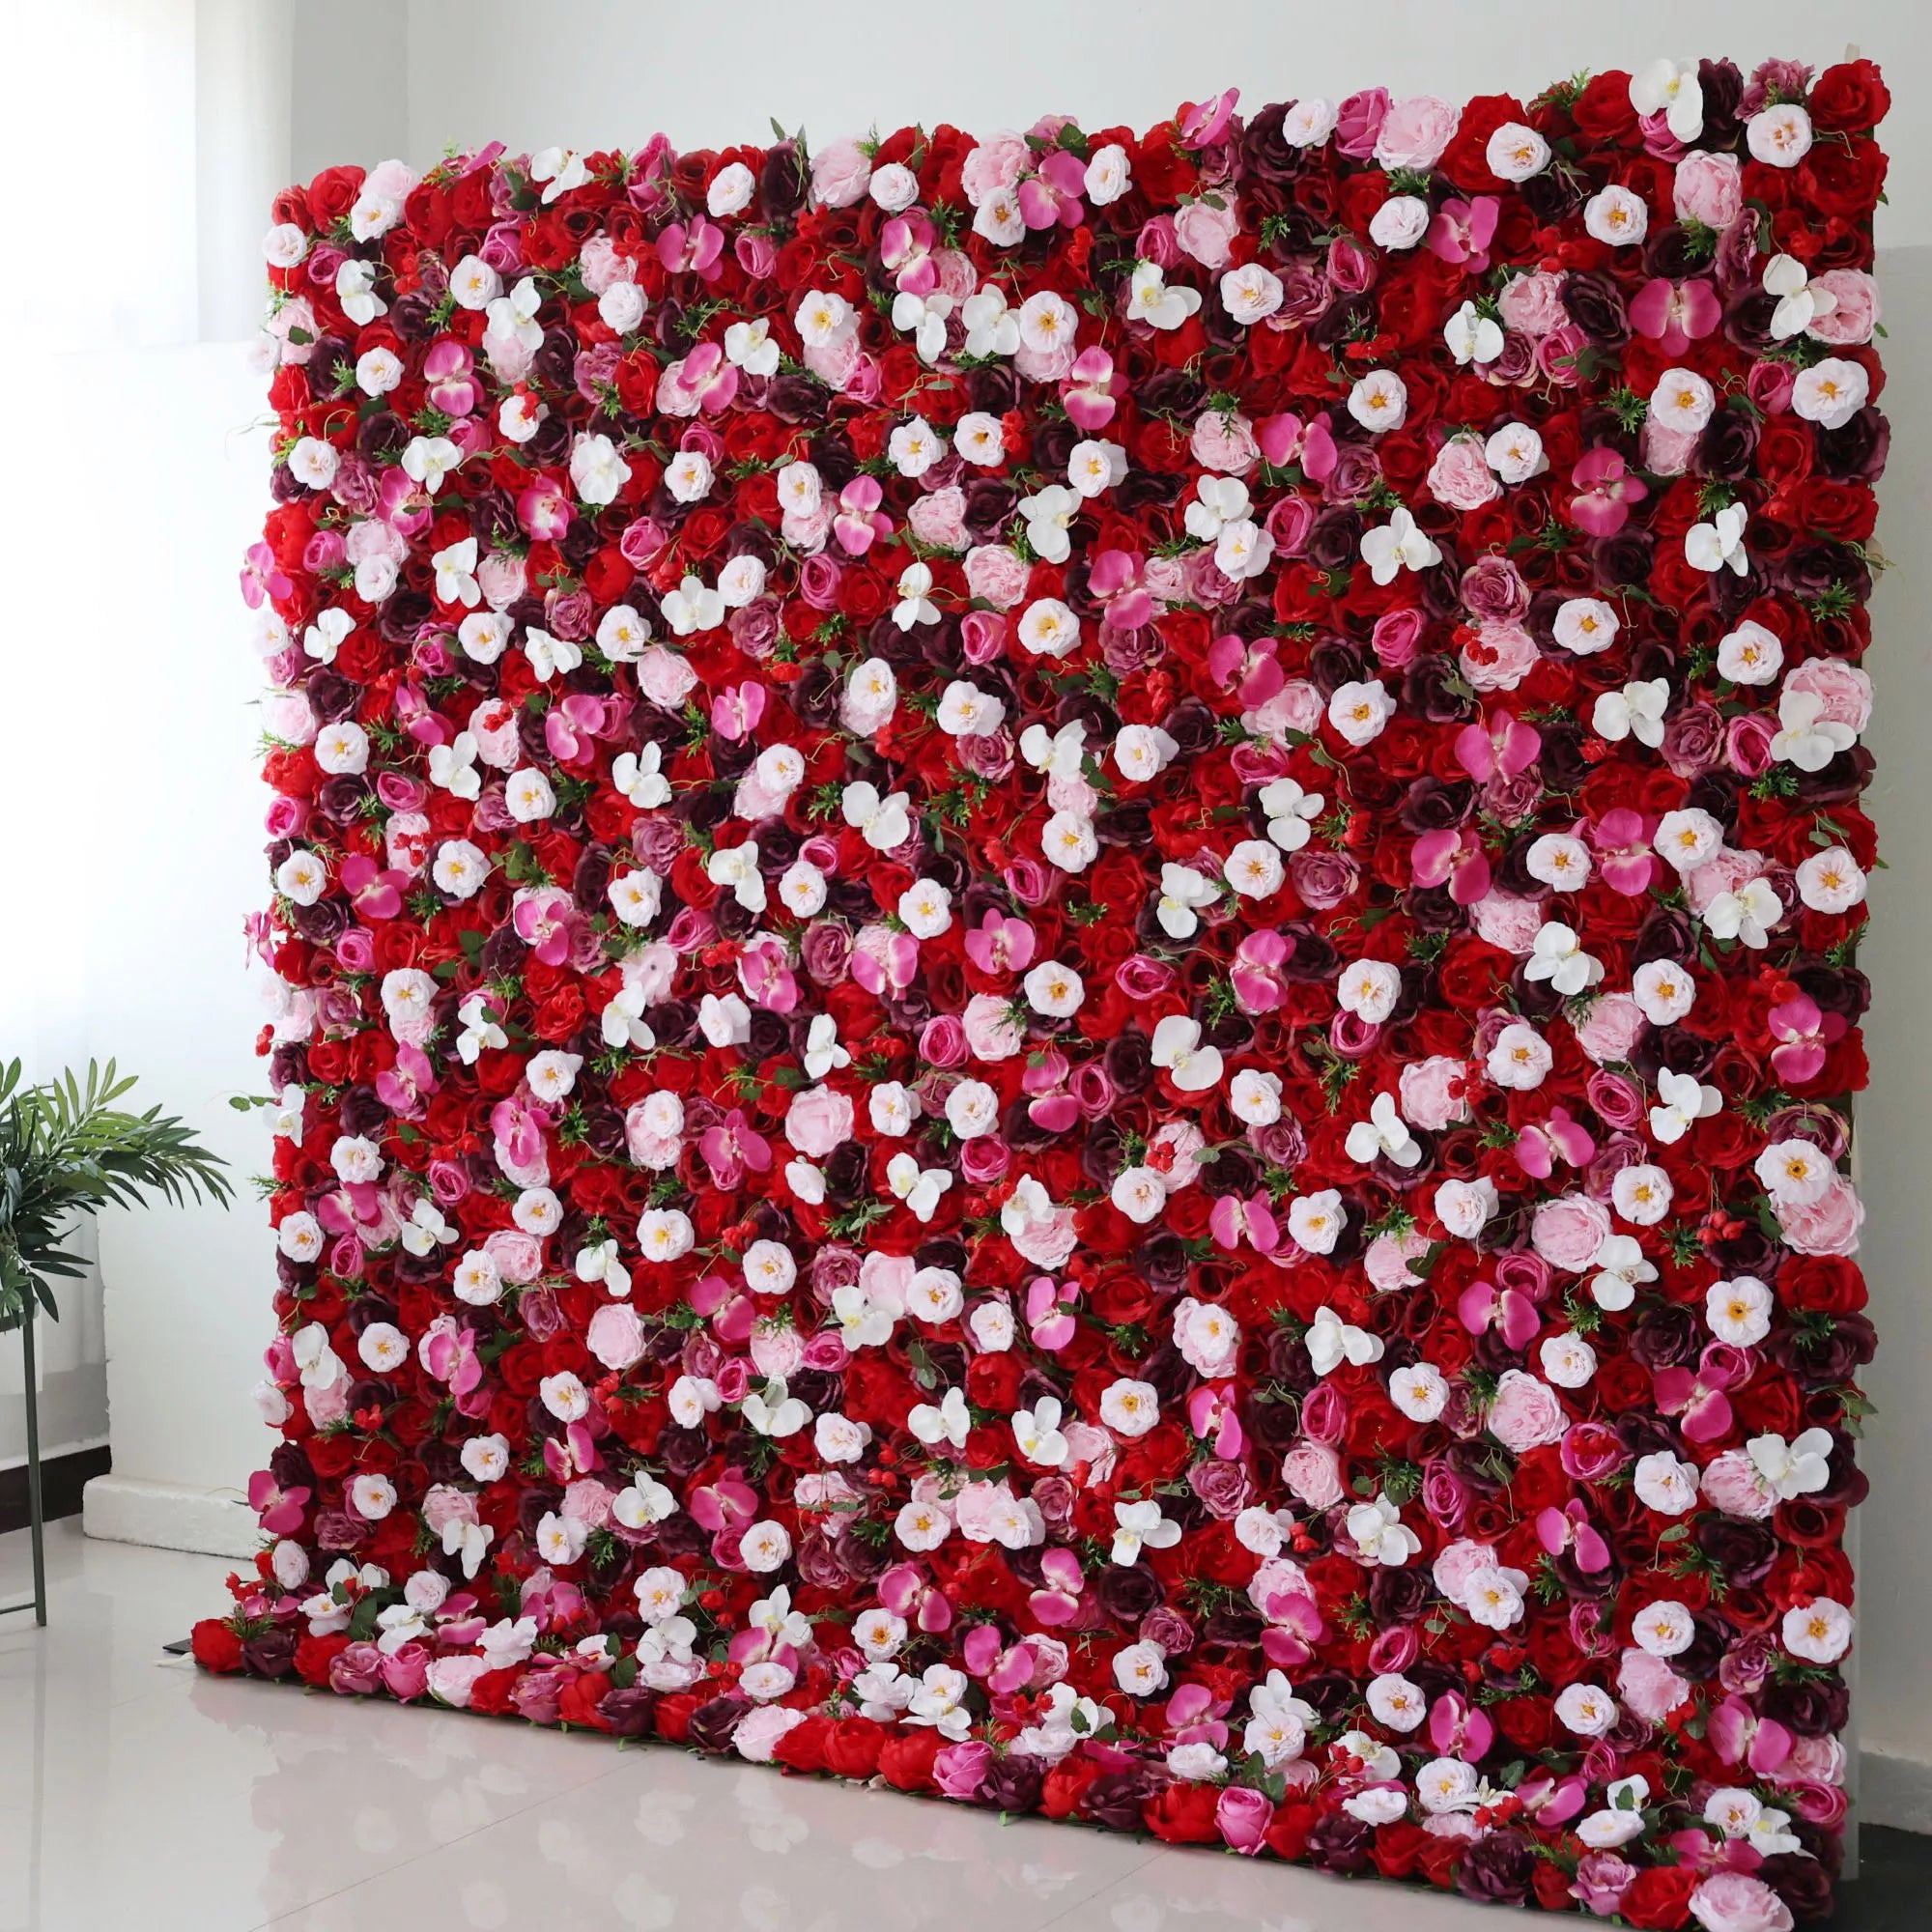 Blooming Symphony: A lush mosaic of roses in shades of red, pink, and white. A breathtaking backdrop radiating elegance, love, and romance.